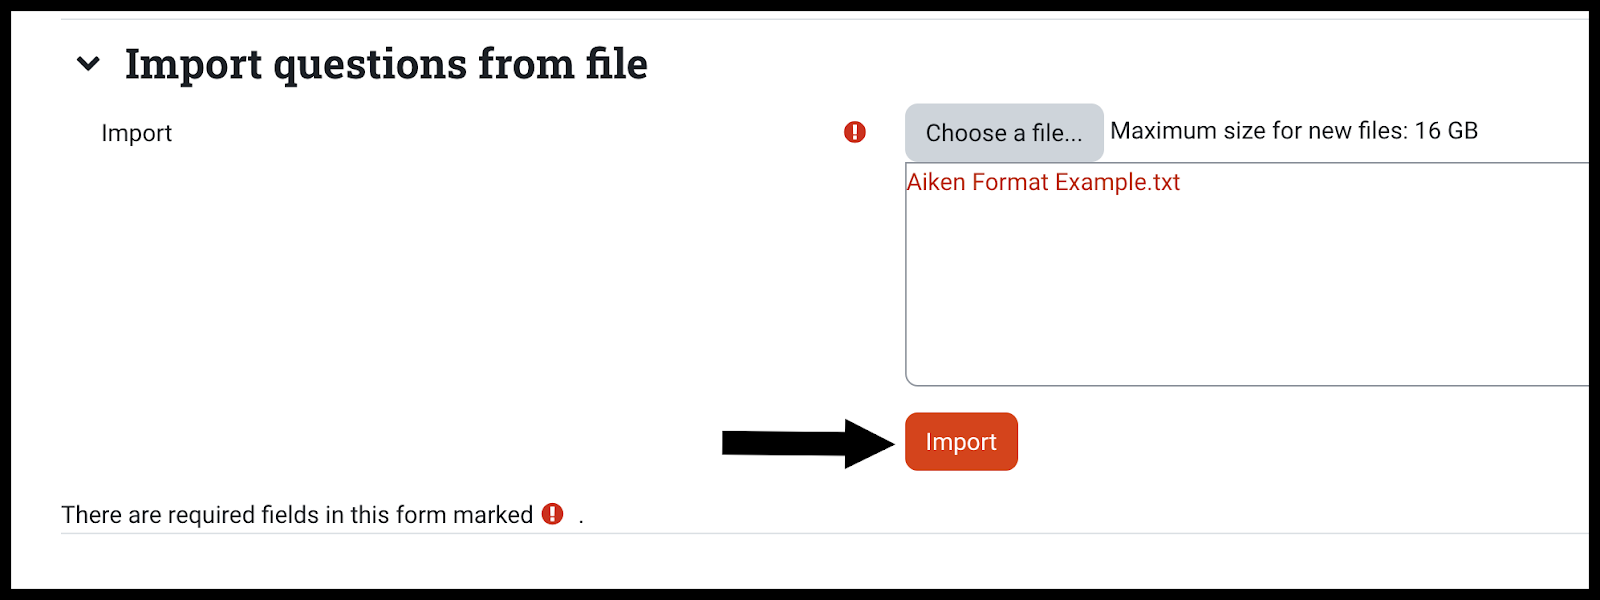 Choose a file button appears in the center of screen; quiz question file titled Aiken Format Example is in the file are beneath Choose a file button; Import button is beneath the file area with an arrow pointing to it